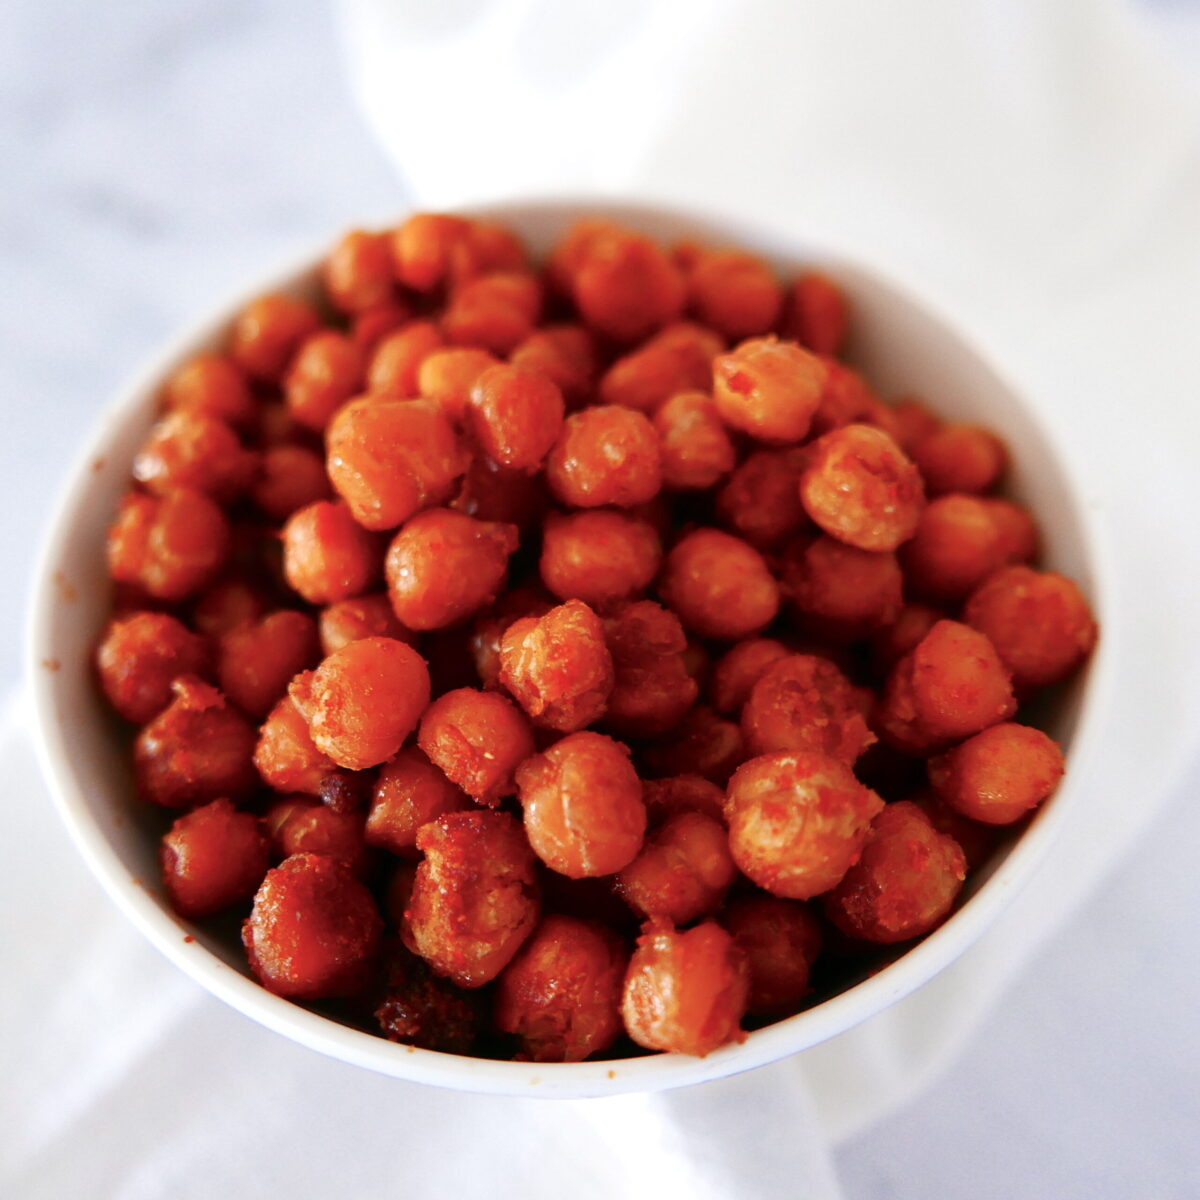 Chickpeas in a small white cup.